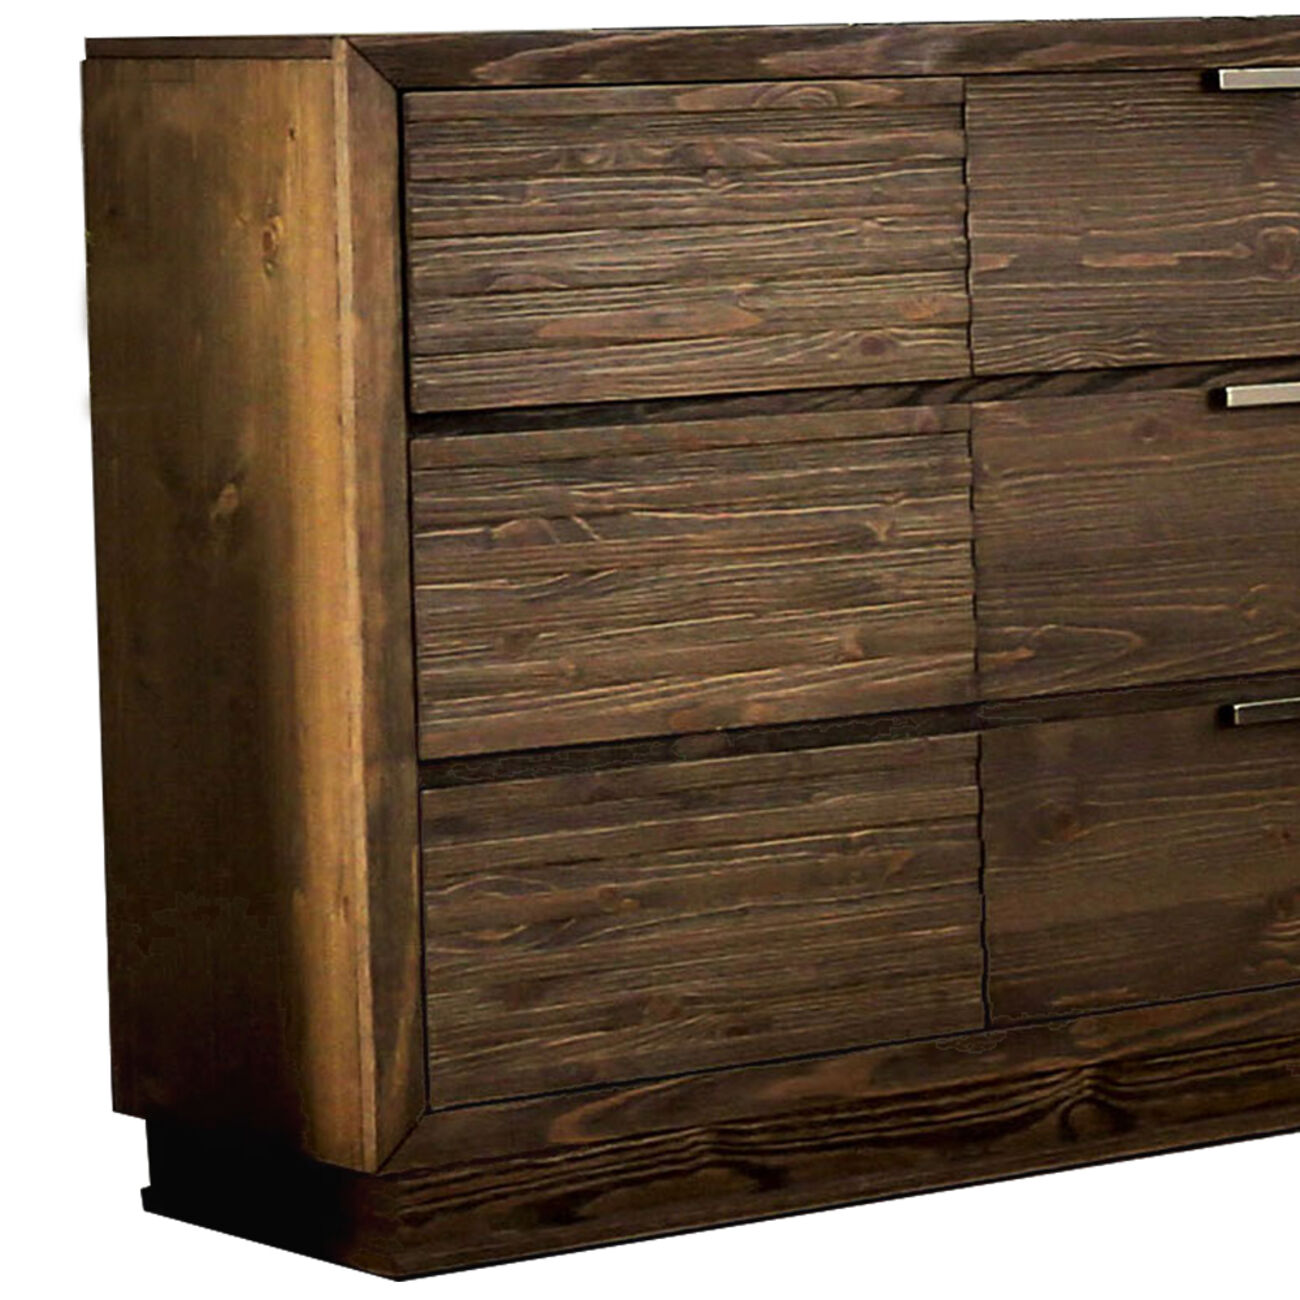 9 Drawer Rustic Style Wooden Dresser with Finger Pull Handles, Brown